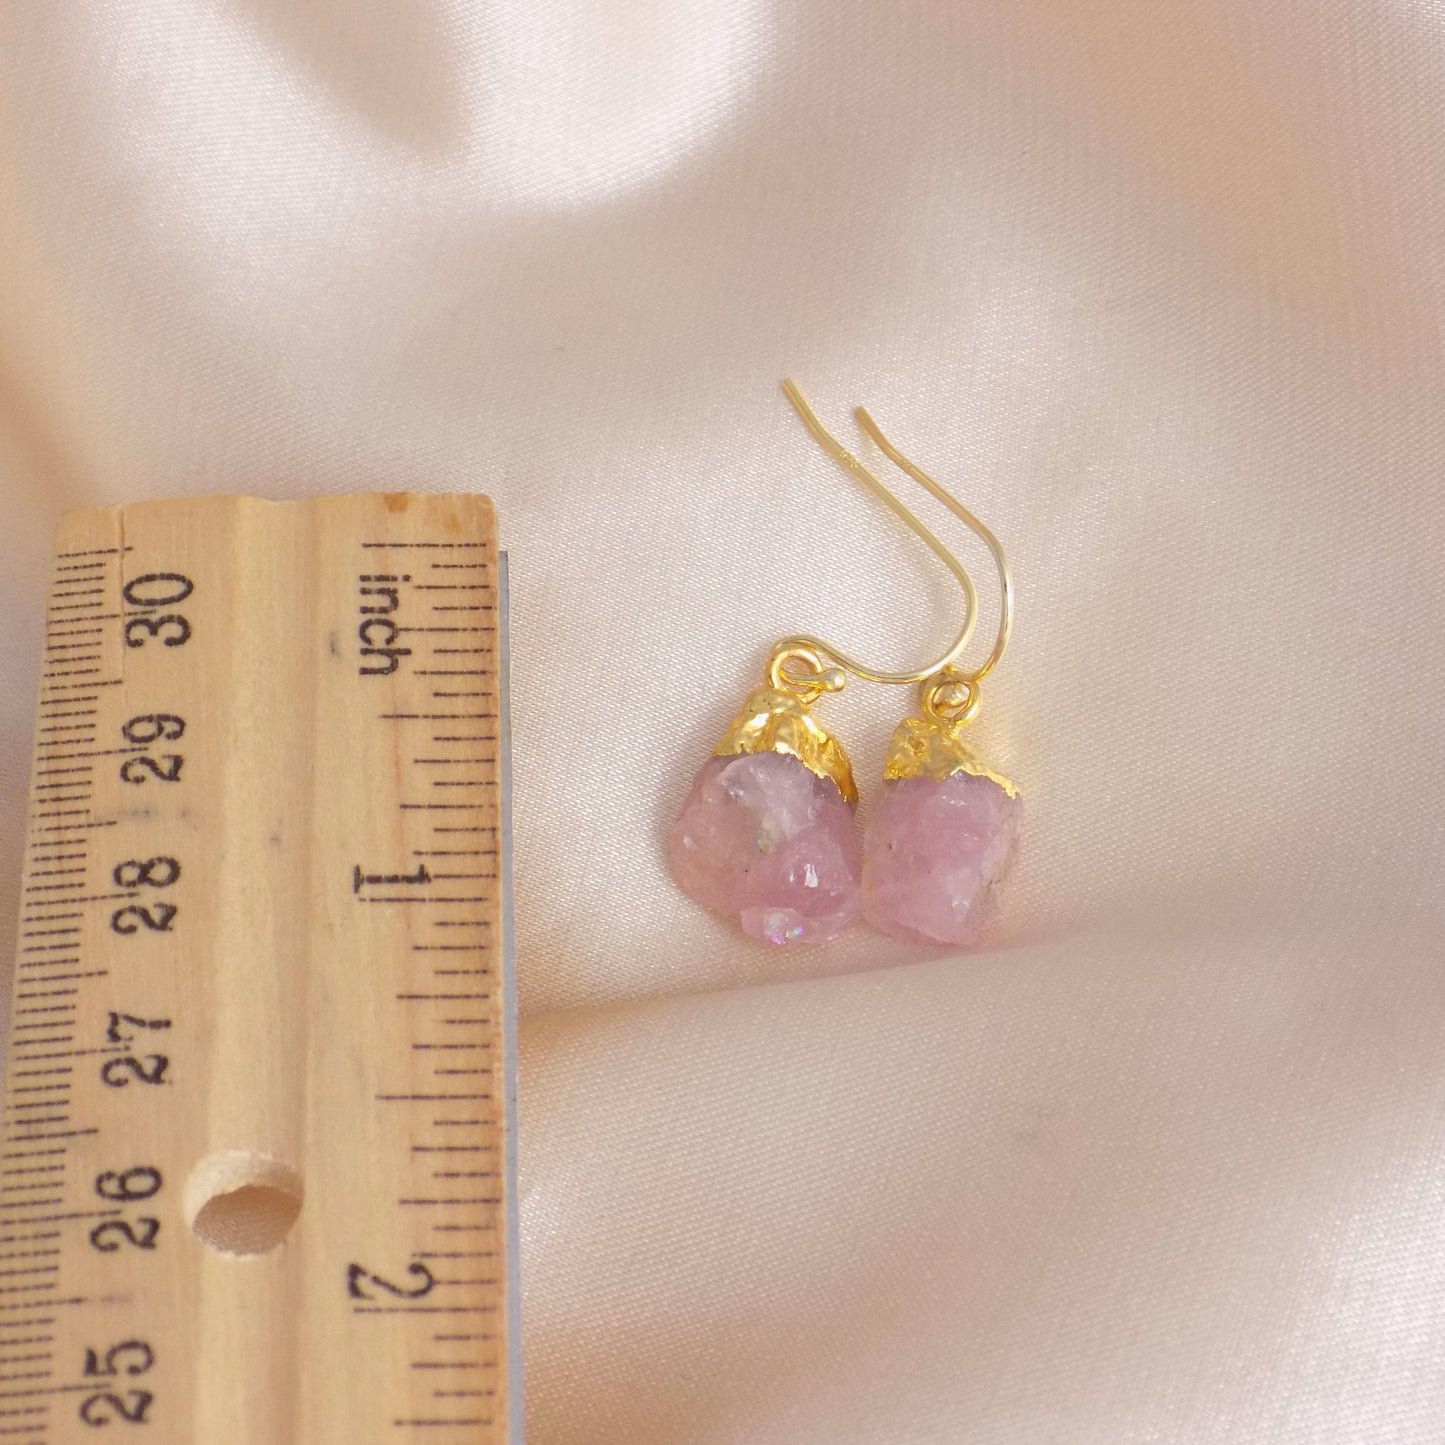 Raw Rose Quartz Earrings Gold, October Birthstone, Light Pink Chunky Stone Earring, Heart Chakra Crystals, Christmas Gifts Women, M6-727